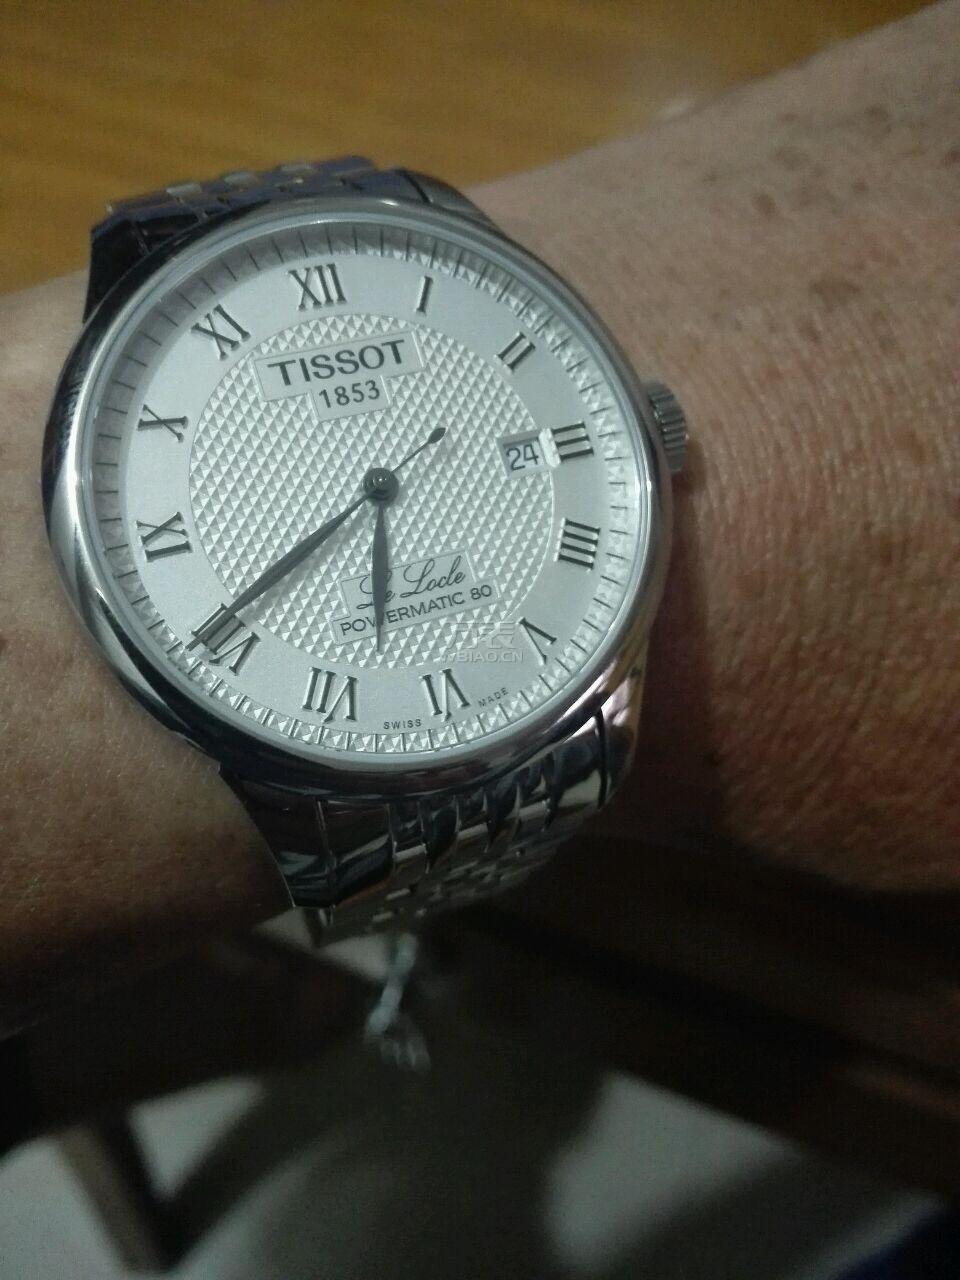 The elegant and simple Tissot will enhance the charm of the men wearers perfectly.